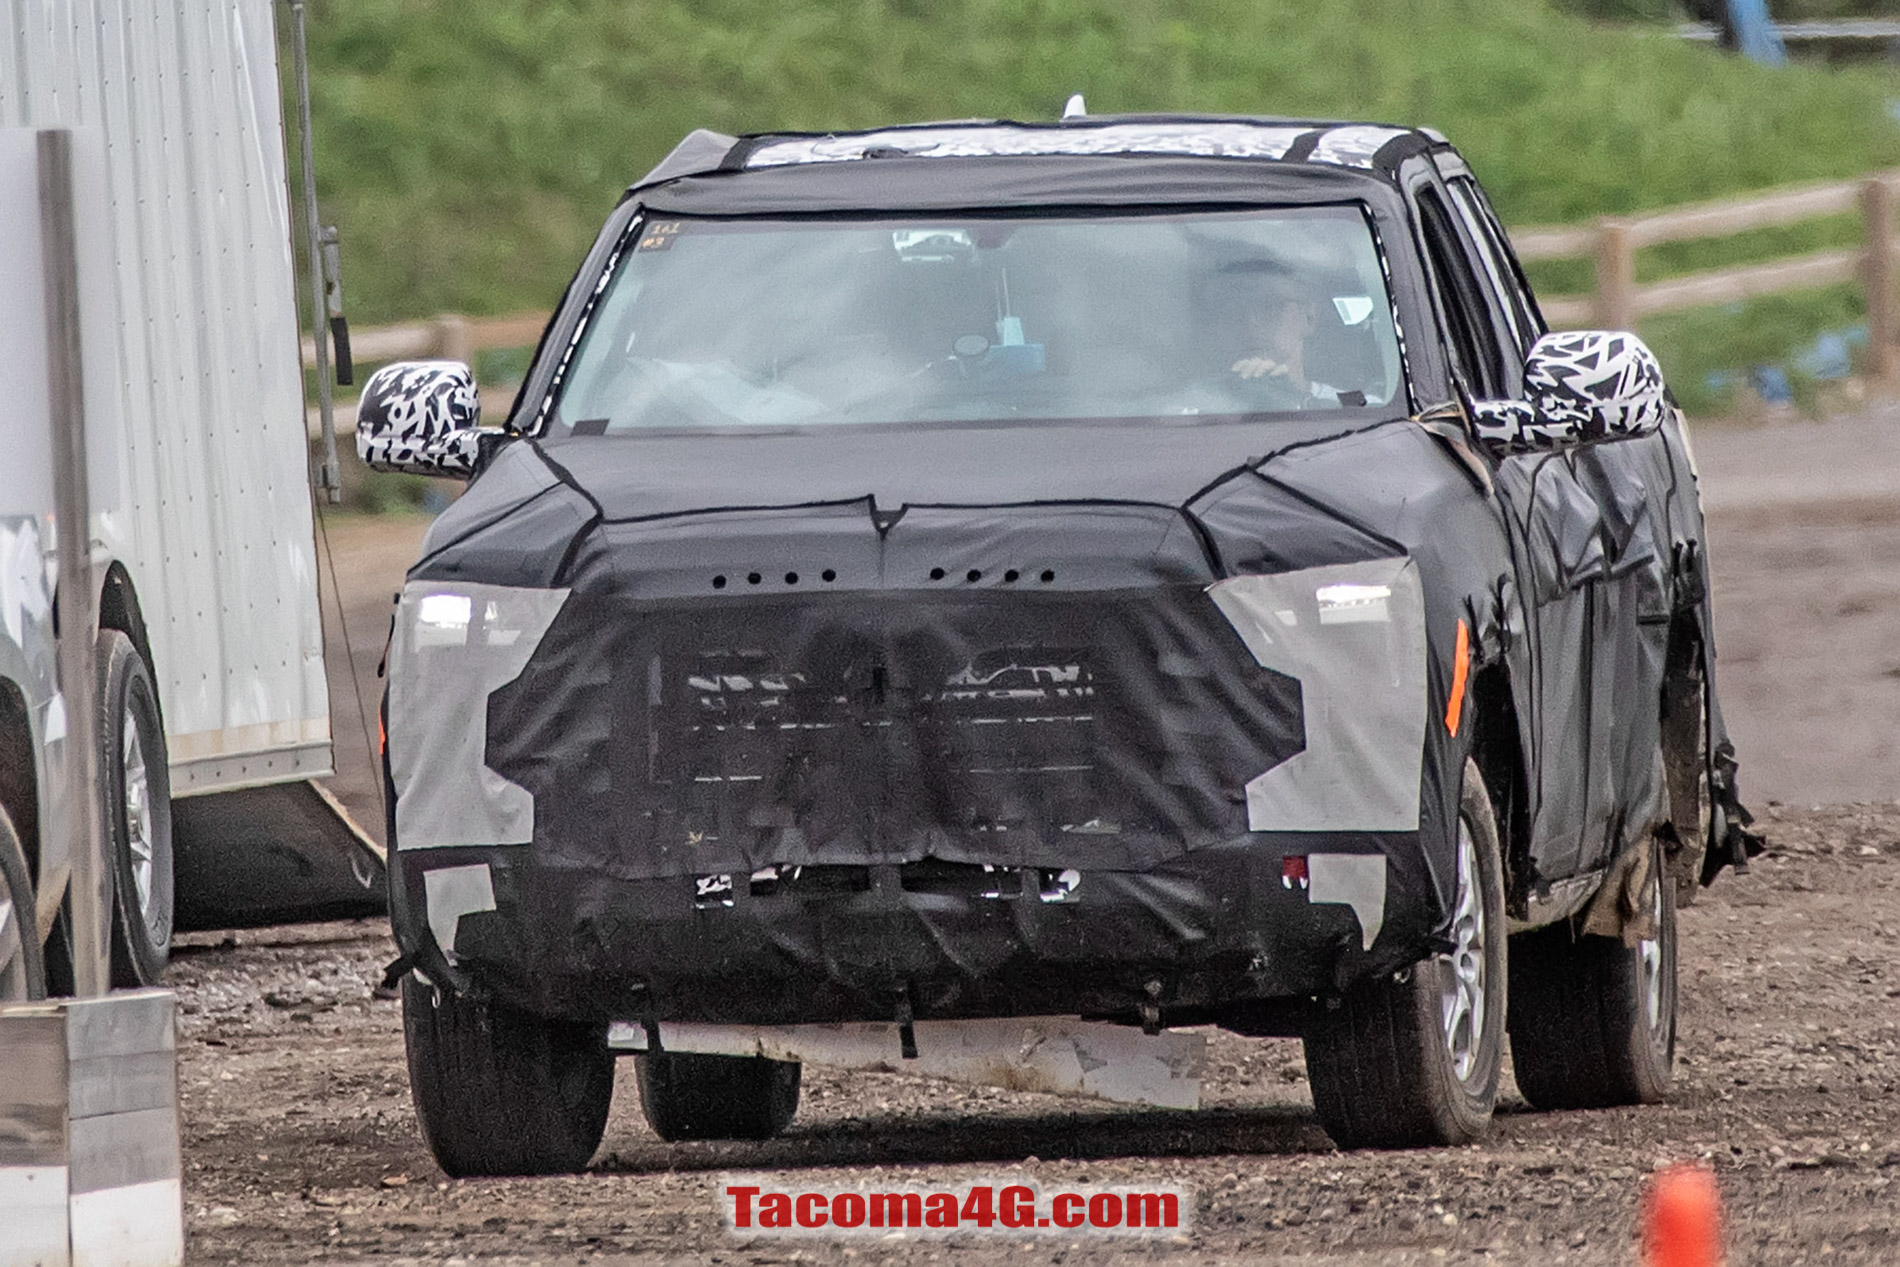 2024 Tacoma New 2024 Tacoma (4th Next Gen) Mule Off-Road Testing Reveals More Suspension Details -- 5/27/22 2024 Toyota Tacoma 4th gen spy photos suspension interior 1